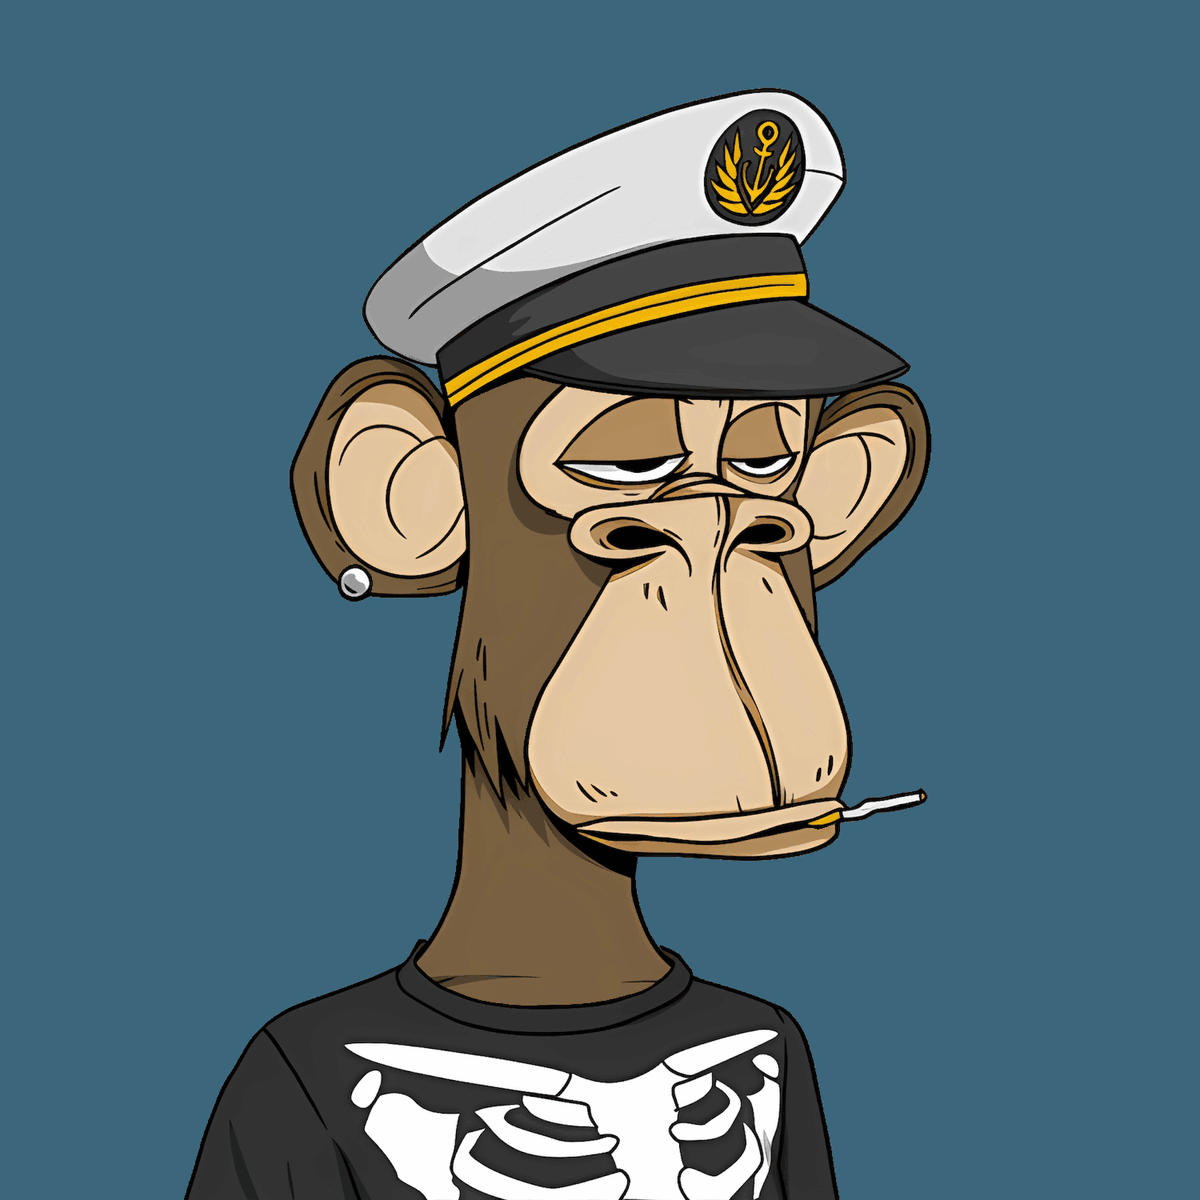 #5293 OpenSea- opensea.io/assets/ethereu… 
- Skipper, head 
- bored, eyes 
- ziggi, mouth 
- bone, tshirt 
- brown, fur 
- blue, background 

--> 0.06 Ethereum 
--> @RebelApeYC 
--> @marzombico / @nico_zoeller 

Who order this sick Rebel Ape NFT and join the family #RAYC🏁